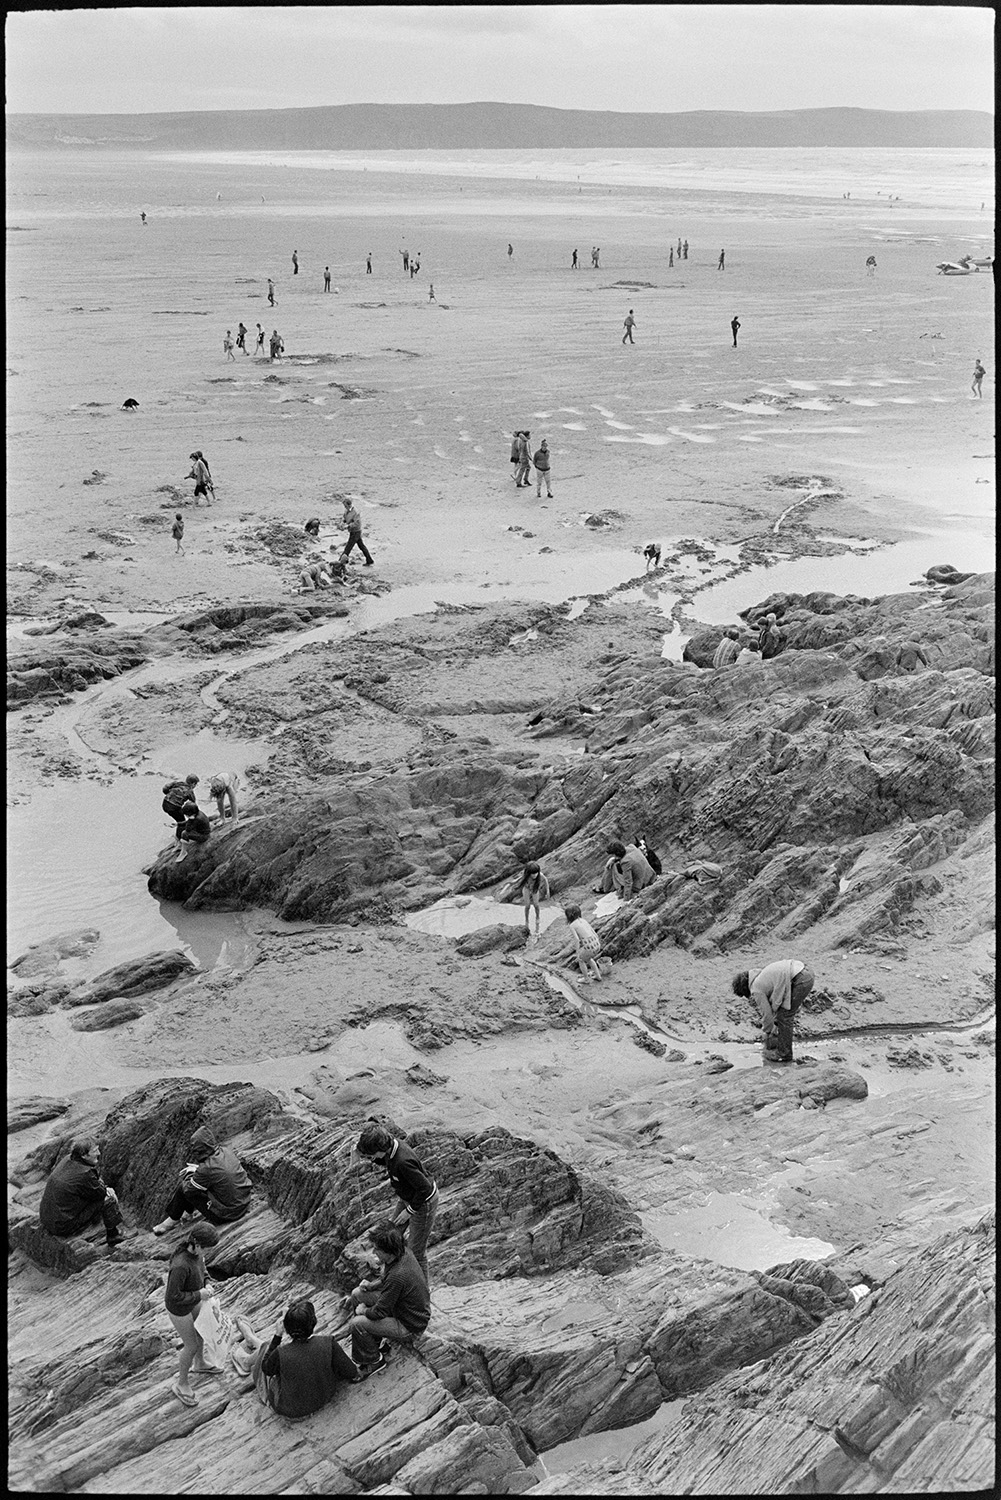 Beach scenes with people sheltering and having tea, children playing in rock pools.
[Holidaymakers sitting on rocks at Woolacombe beach, with children playing in rock pools nearby. The sea and people walking on the beach are visible in the background.]